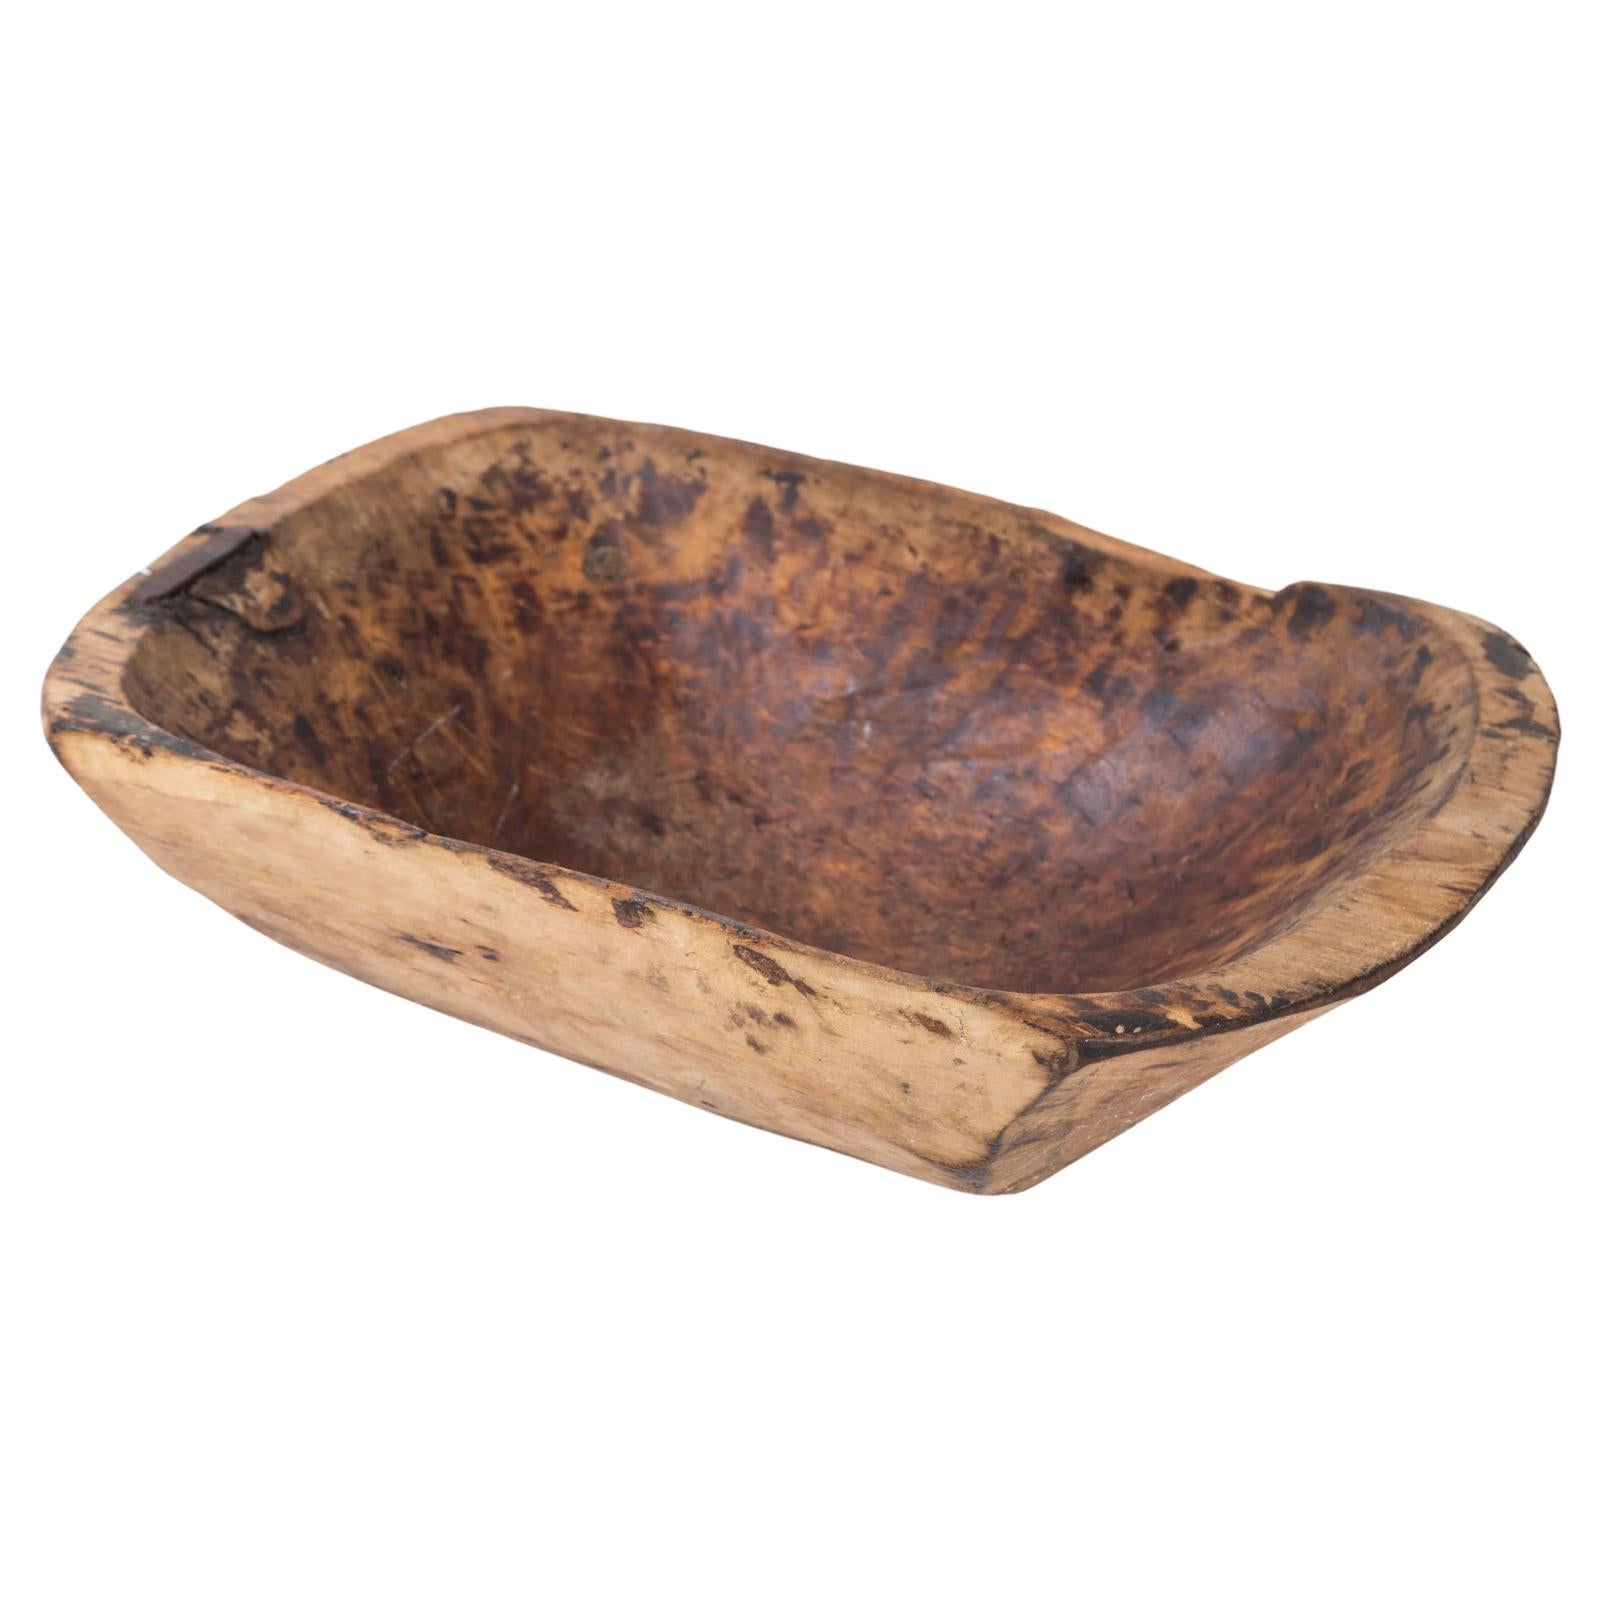 European Hand-Carved Wood Bowl, Early 20th Century